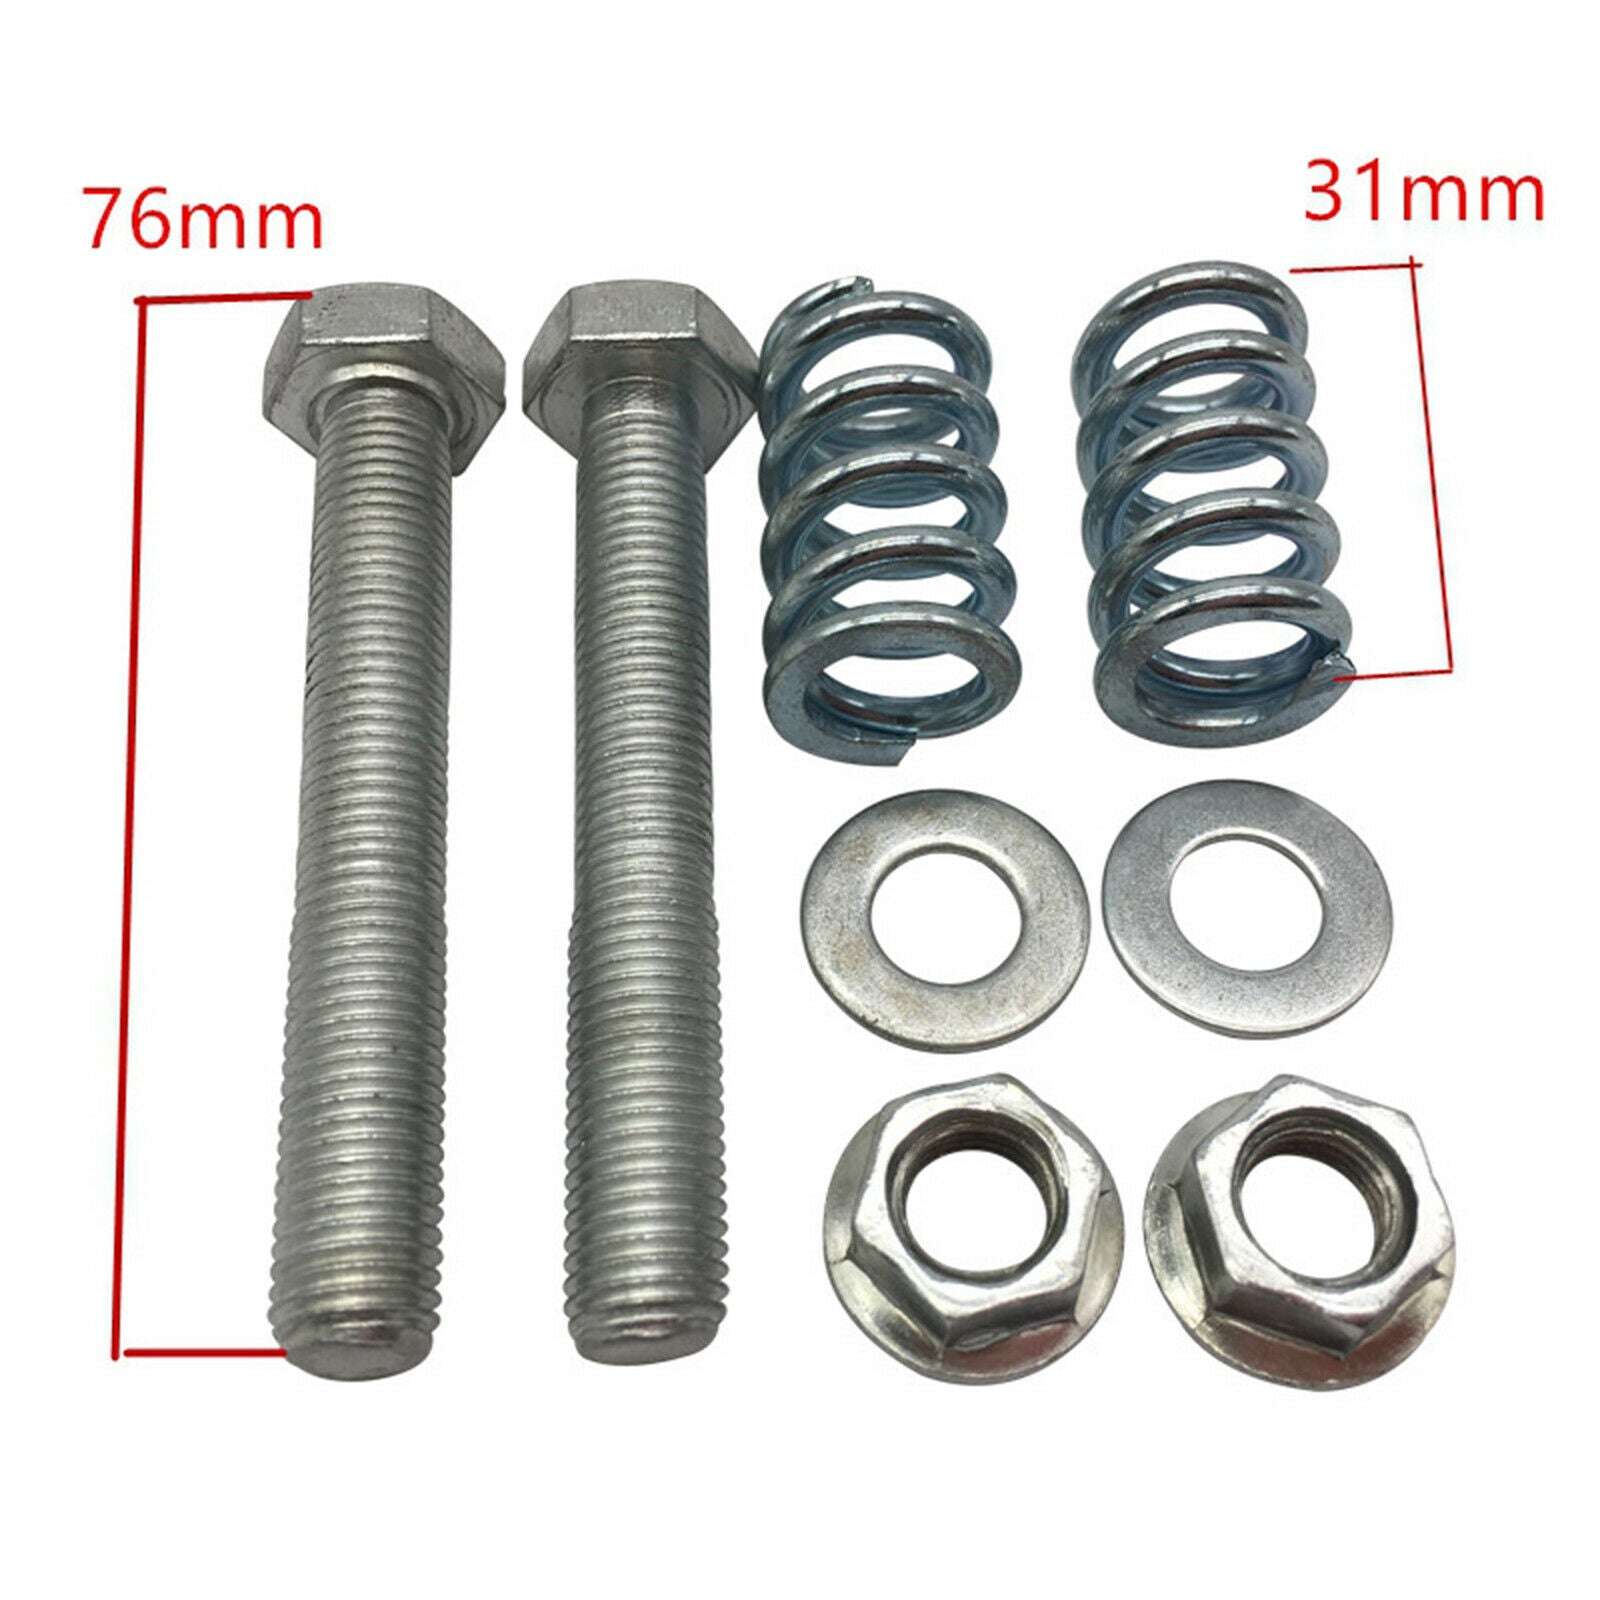 2Pcs M10x1.25 Exhaust Bolt and Spring Nut Hardware Kit Repair Replacement